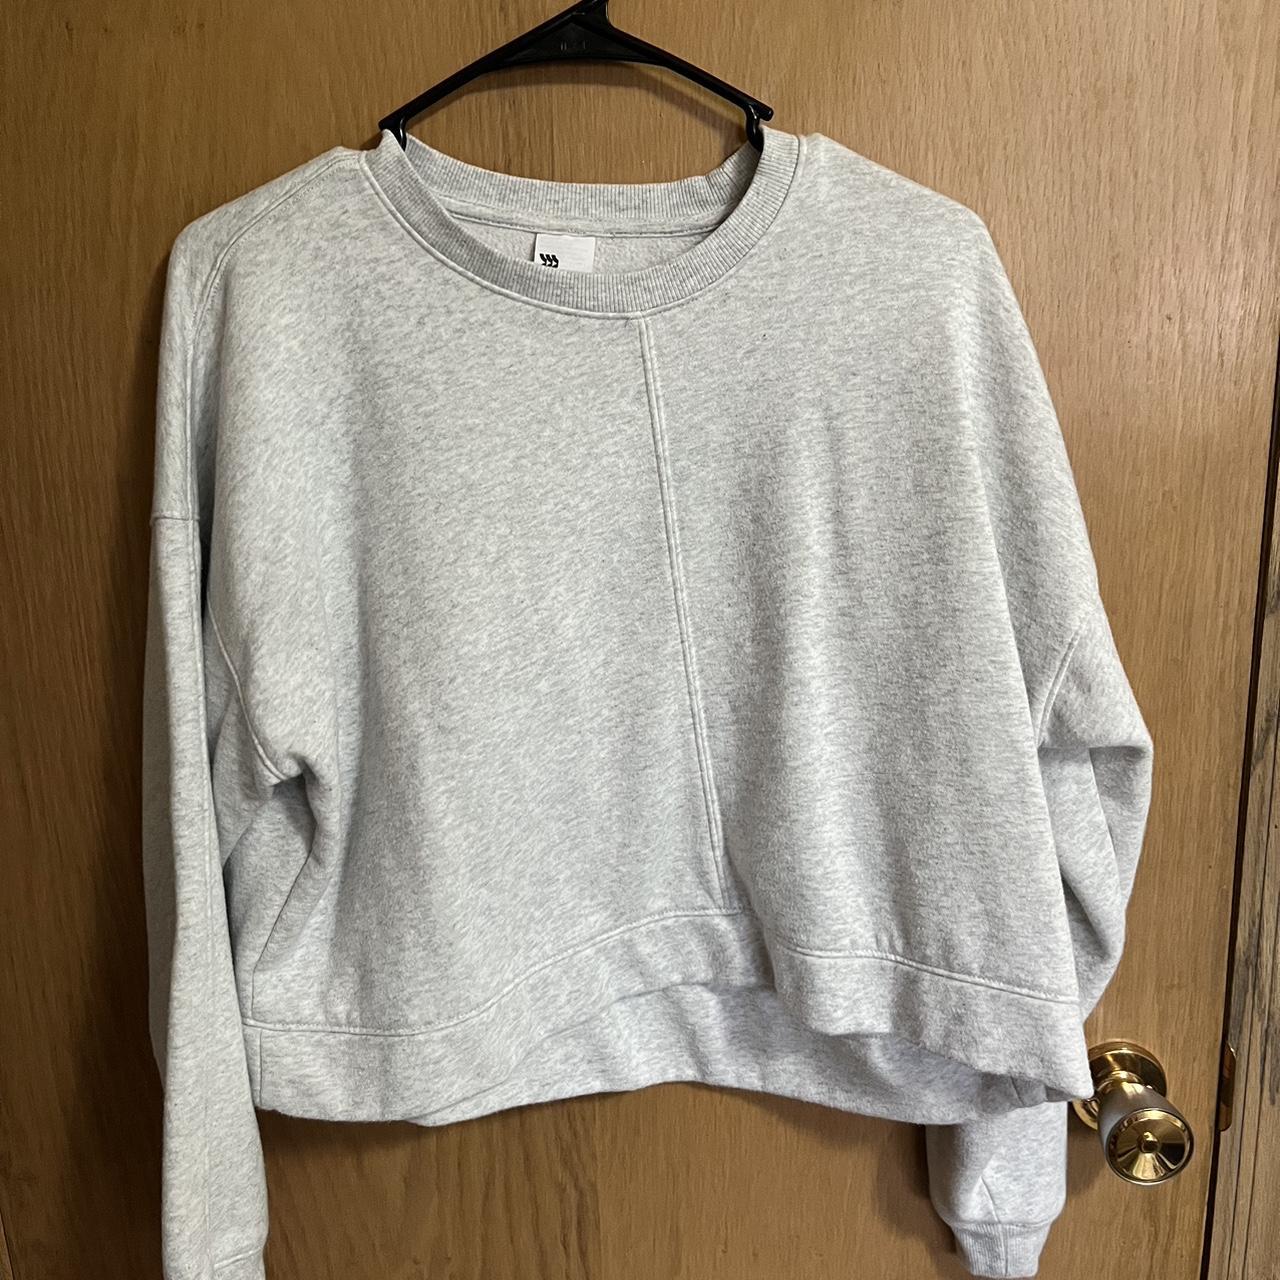 Target All in Motion Active wear sweater #target - Depop